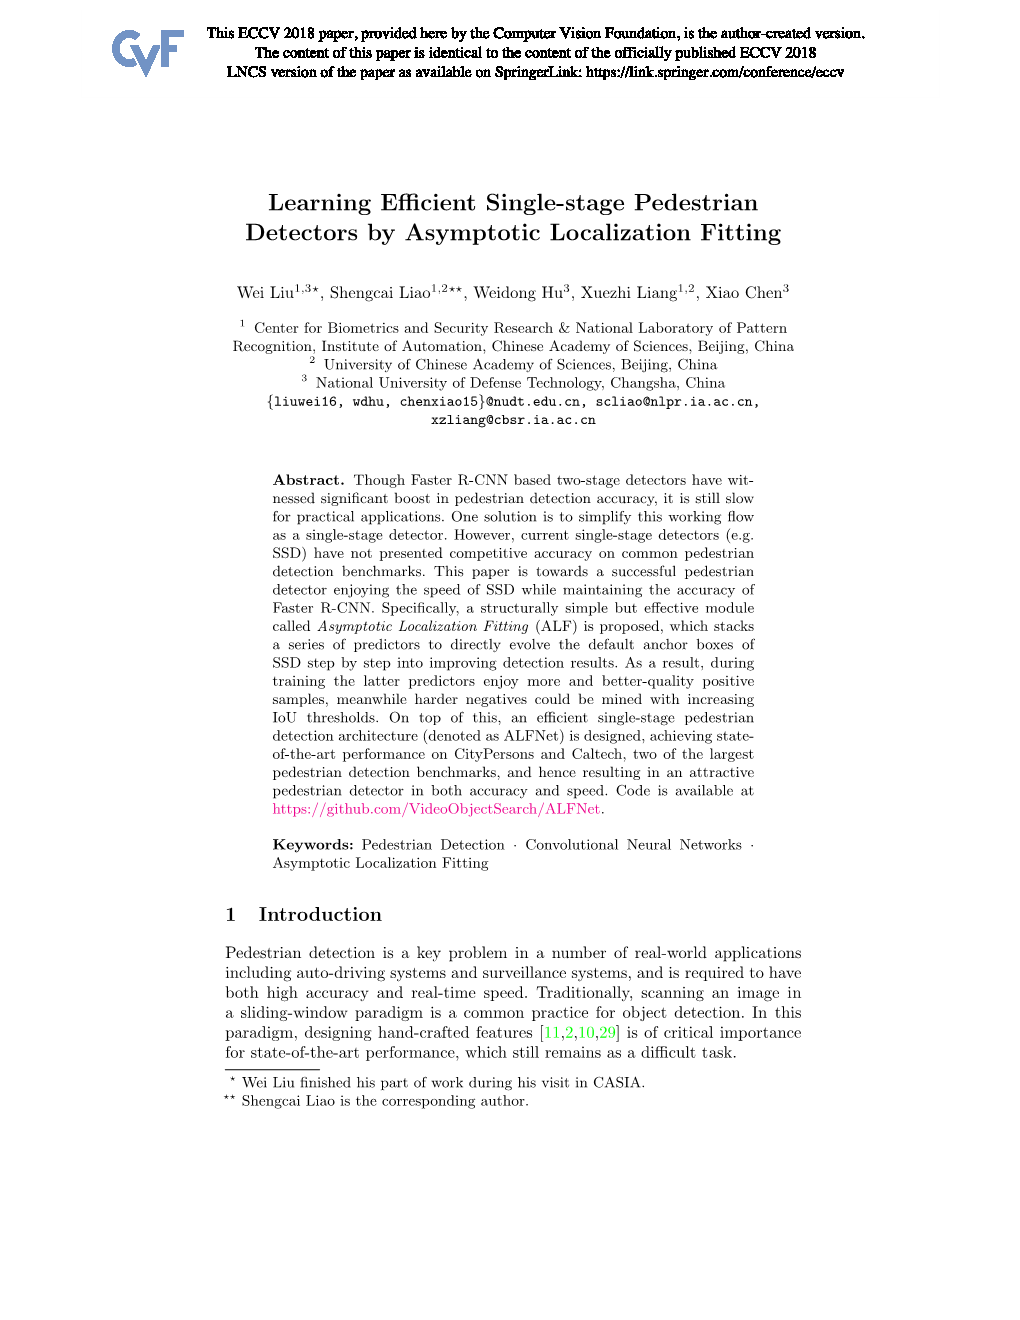 Learning Efficient Single-Stage Pedestrian Detection by Asymptotic Localization Fitting